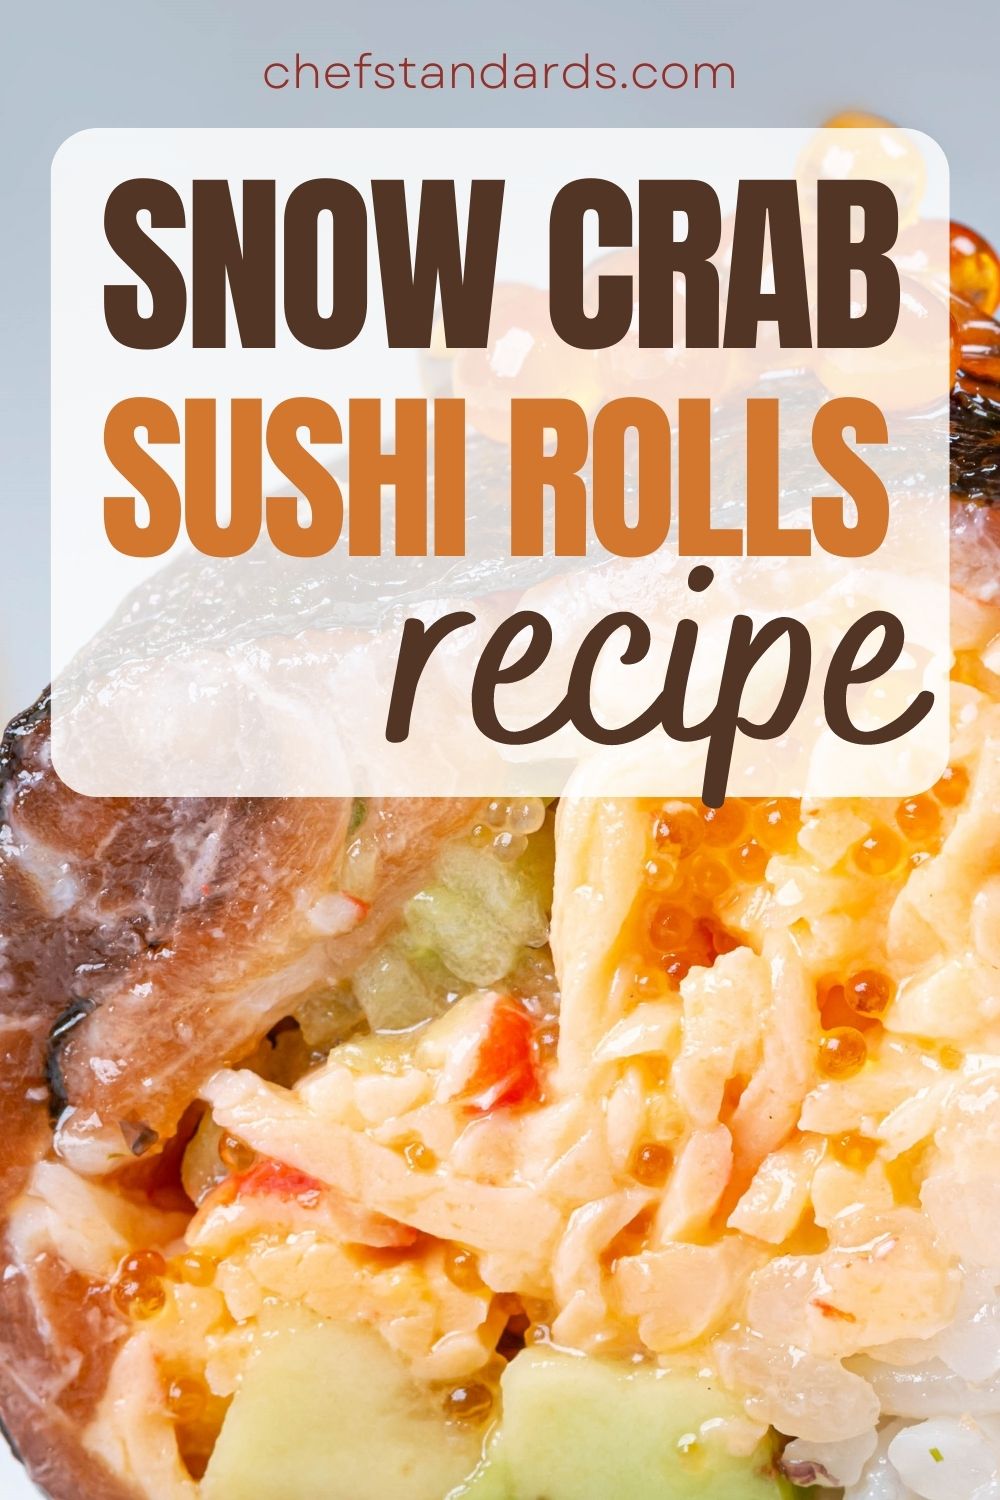 A Perfect Snow Crab Roll Recipe To Make On Your Own
